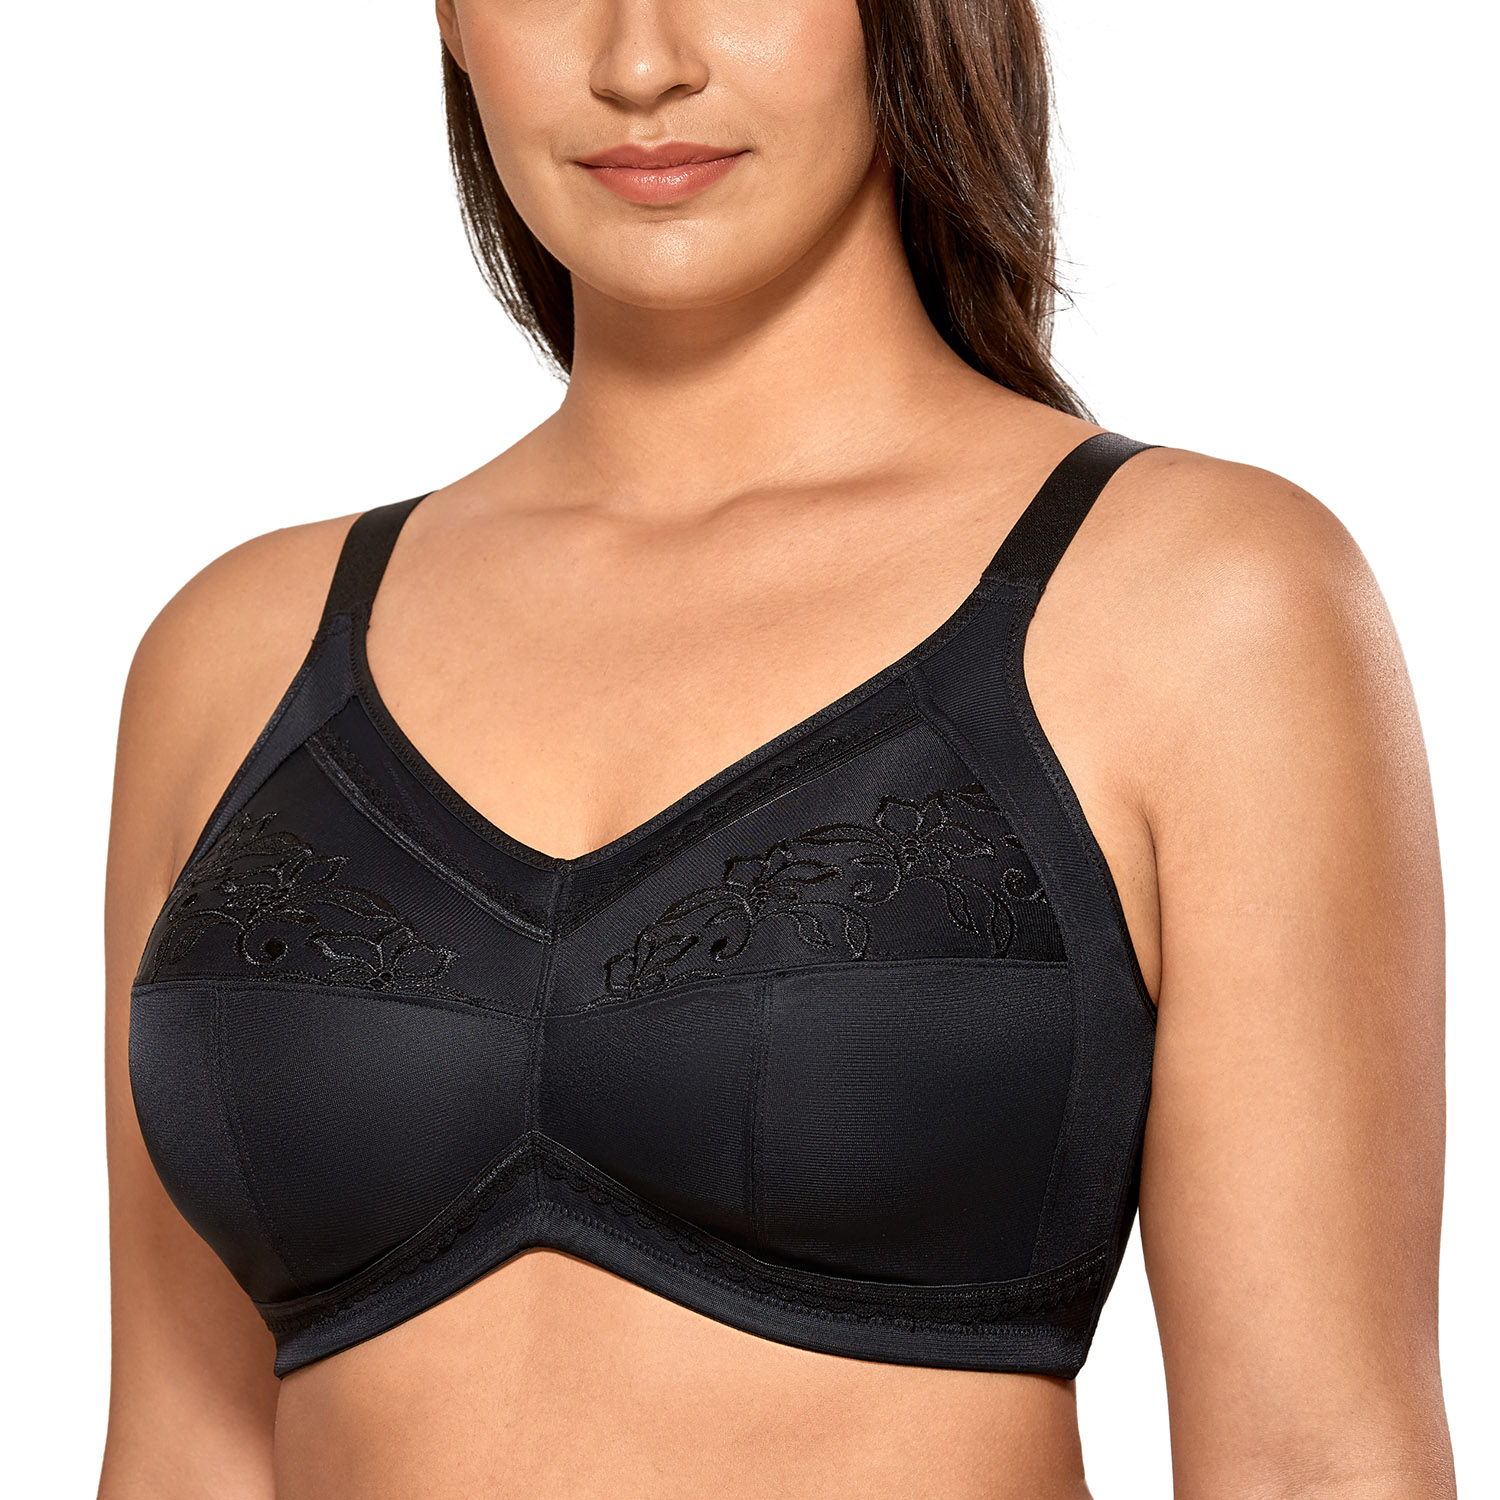 LAUDINE Women's Mastectomy Bras Full Coverage Wire-Free Pockets